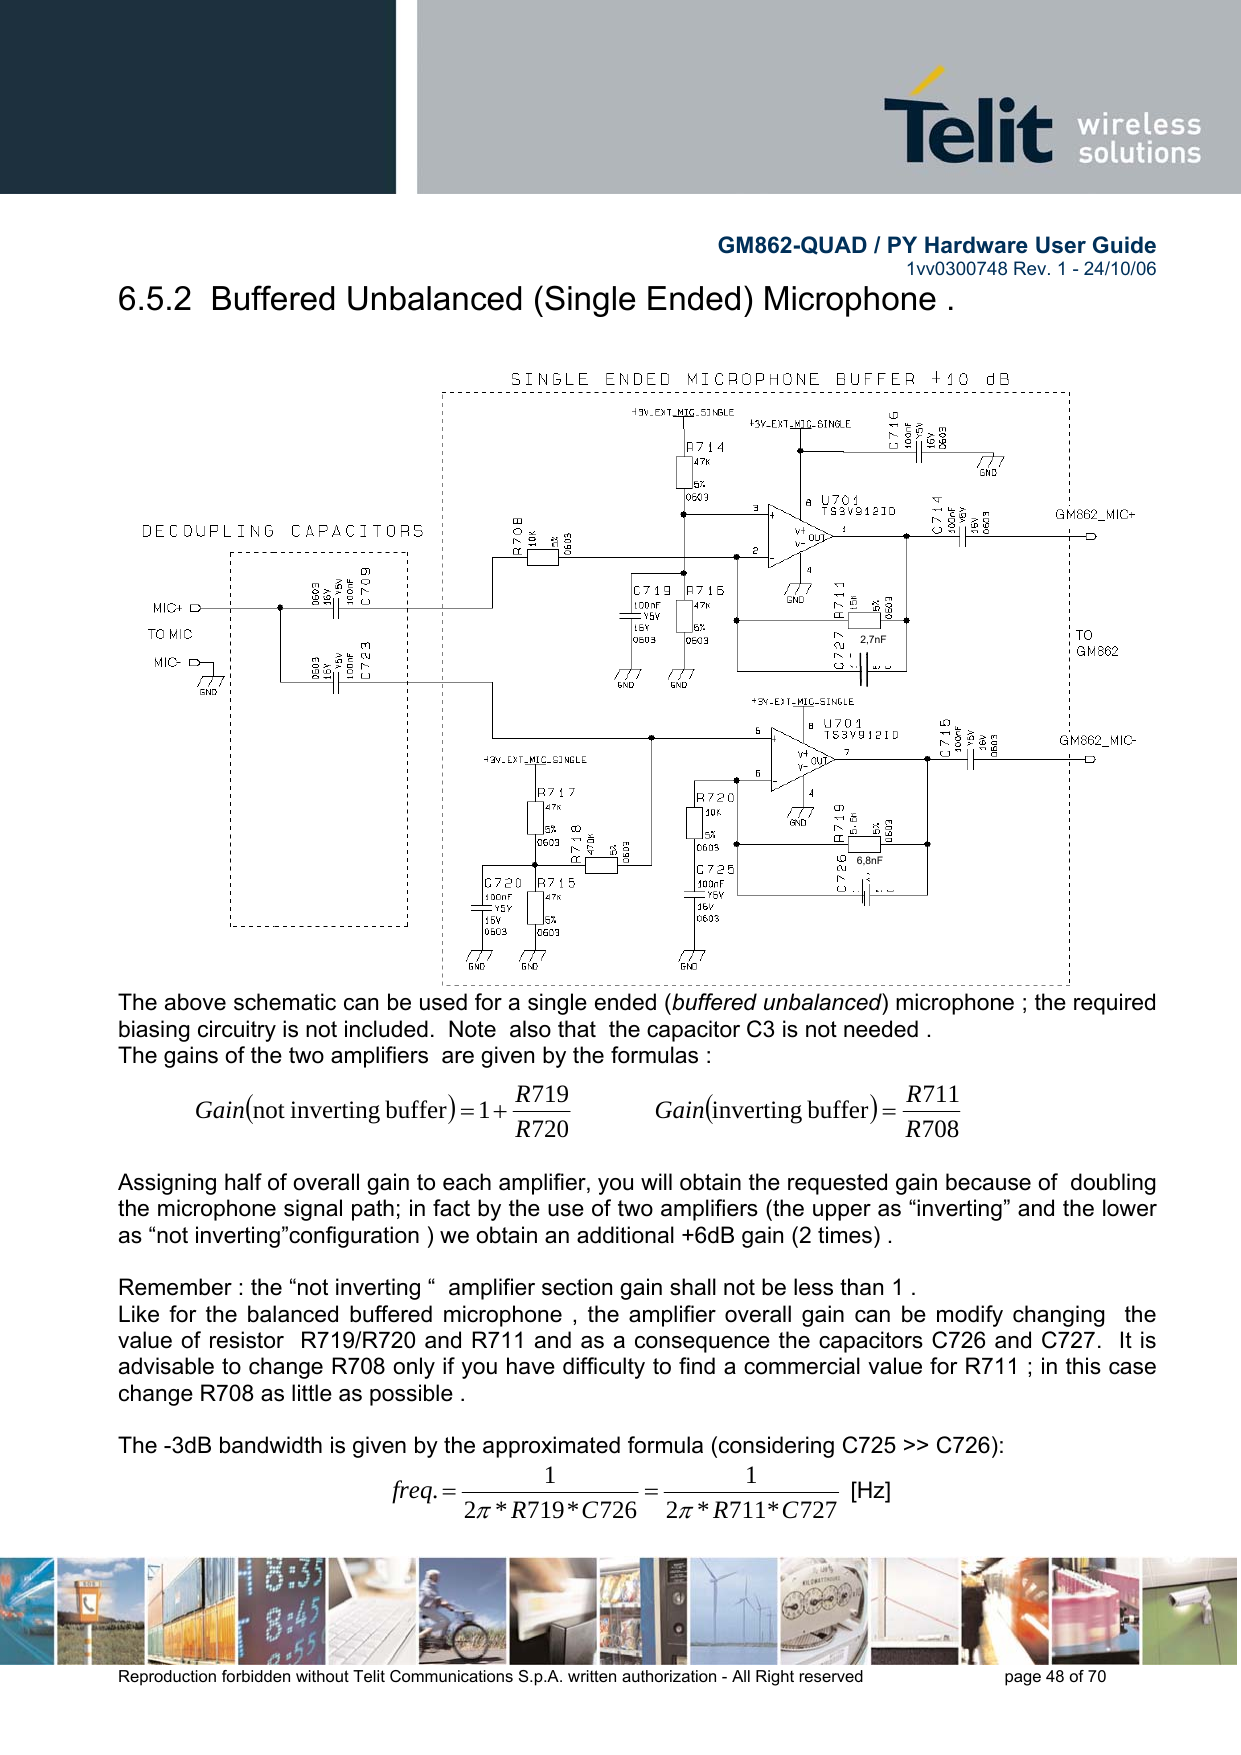        GM862-QUAD / PY Hardware User Guide   1vv0300748 Rev. 1 - 24/10/06    Reproduction forbidden without Telit Communications S.p.A. written authorization - All Right reserved    page 48 of 70  6.5.2  Buffered Unbalanced (Single Ended) Microphone .   The above schematic can be used for a single ended (buffered unbalanced) microphone ; the required biasing circuitry is not included.  Note  also that  the capacitor C3 is not needed . The gains of the two amplifiers  are given by the formulas :  ()7207191buffer invertingnot  RRGain +=             ()708711buffer inverting RRGain =   Assigning half of overall gain to each amplifier, you will obtain the requested gain because of  doubling the microphone signal path; in fact by the use of two amplifiers (the upper as “inverting” and the lower as “not inverting”configuration ) we obtain an additional +6dB gain (2 times) .  Remember : the “not inverting “  amplifier section gain shall not be less than 1 .   Like for the balanced buffered microphone , the amplifier overall gain can be modify changing  the value of resistor  R719/R720 and R711 and as a consequence the capacitors C726 and C727.  It is advisable to change R708 only if you have difficulty to find a commercial value for R711 ; in this case change R708 as little as possible .    The -3dB bandwidth is given by the approximated formula (considering C725 &gt;&gt; C726): 727*711*21726*719*21.CRCRfreqππ==  [Hz] 2,7nF 6,8nF 